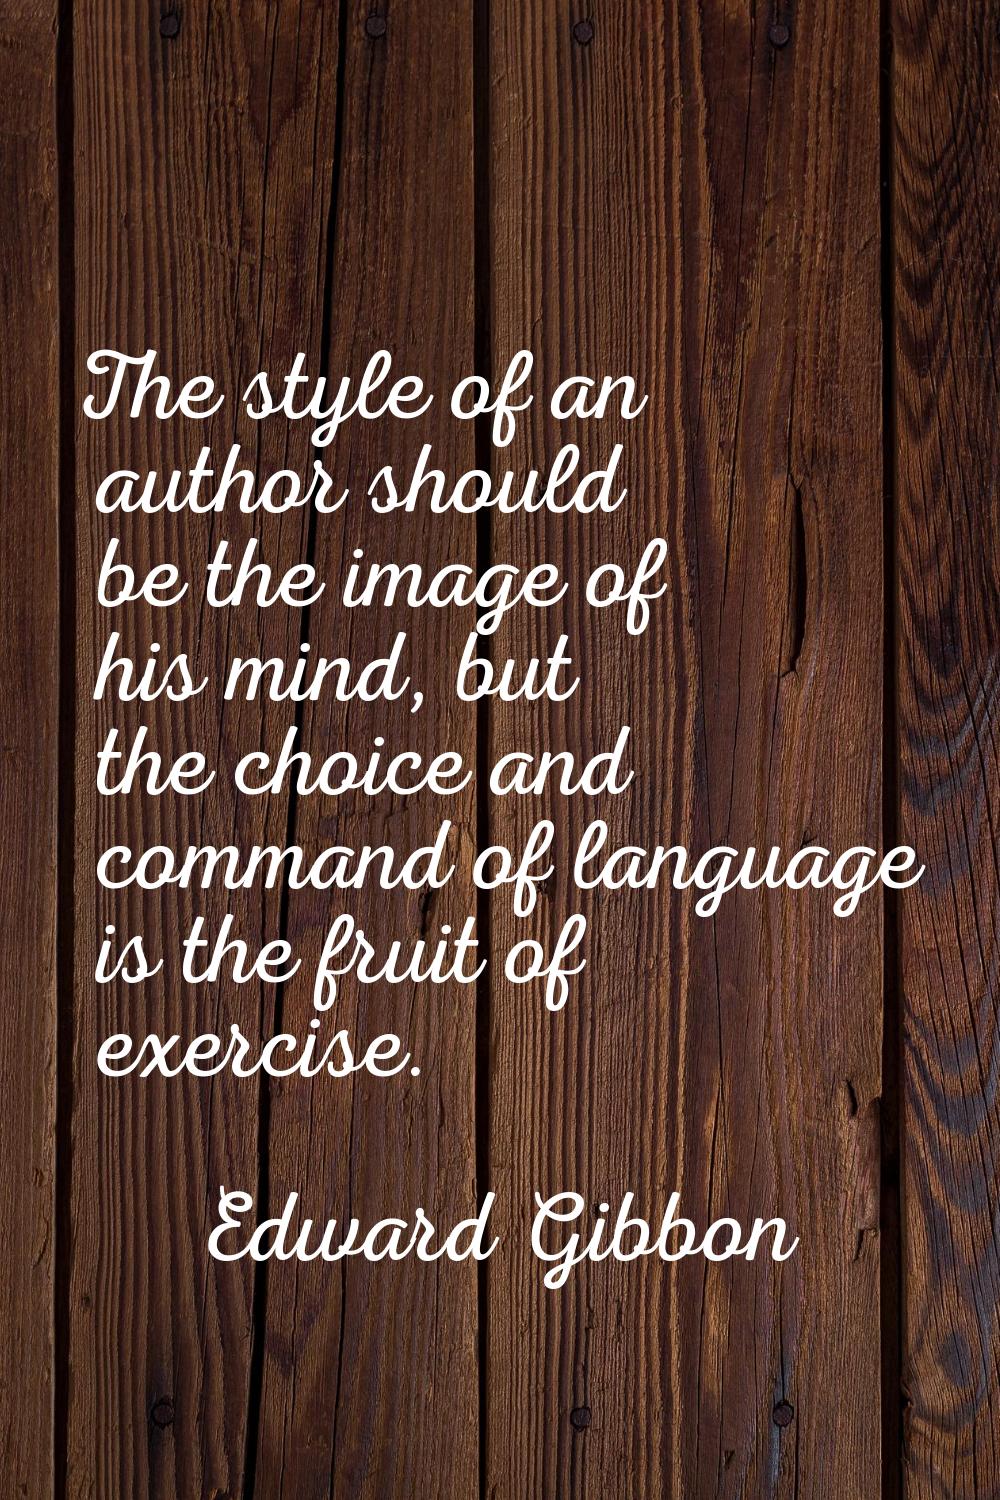 The style of an author should be the image of his mind, but the choice and command of language is t